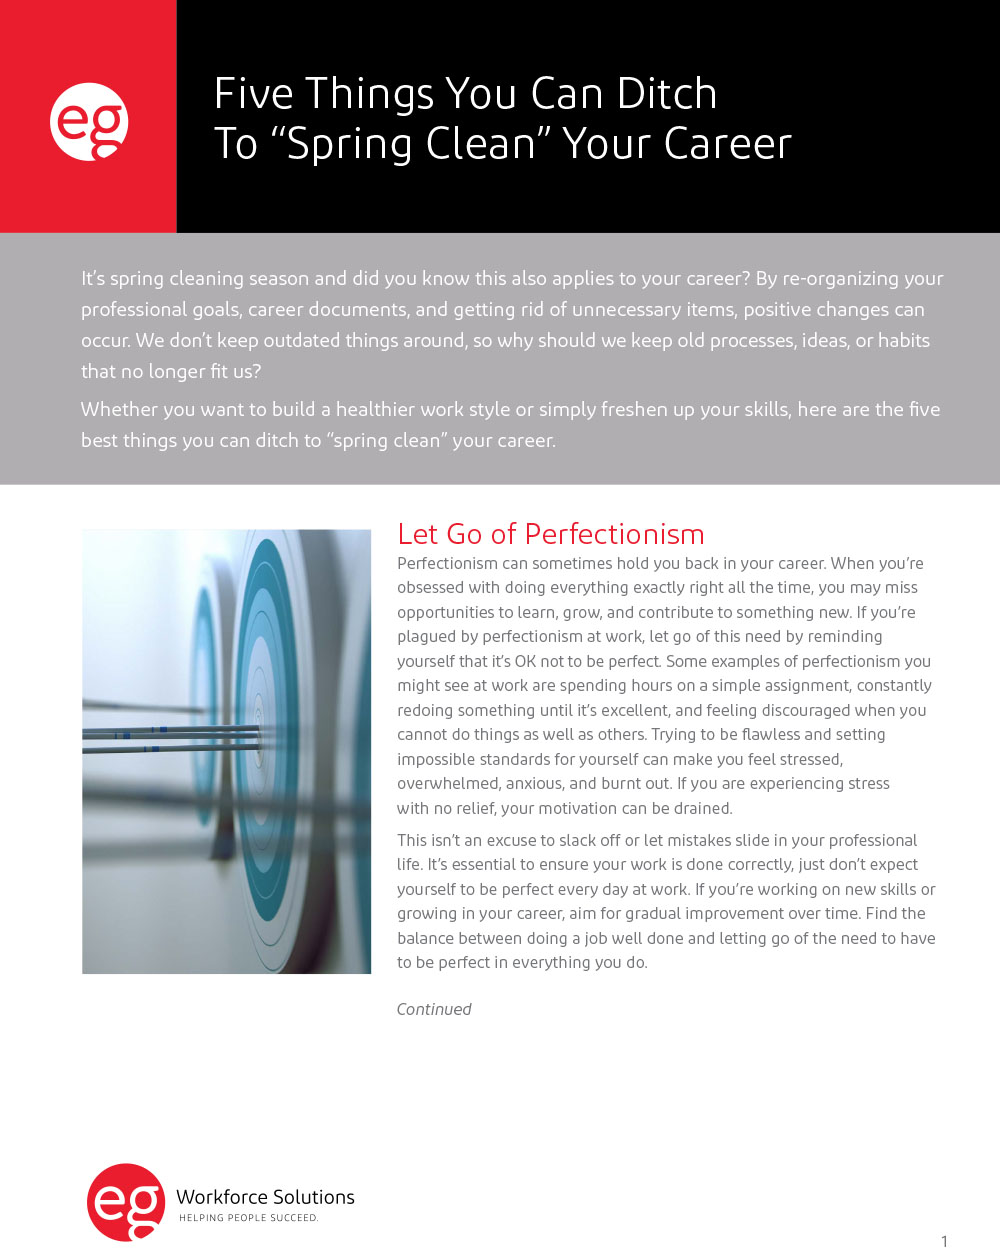 Five Things You Can Ditch To “Spring Clean” Your Career